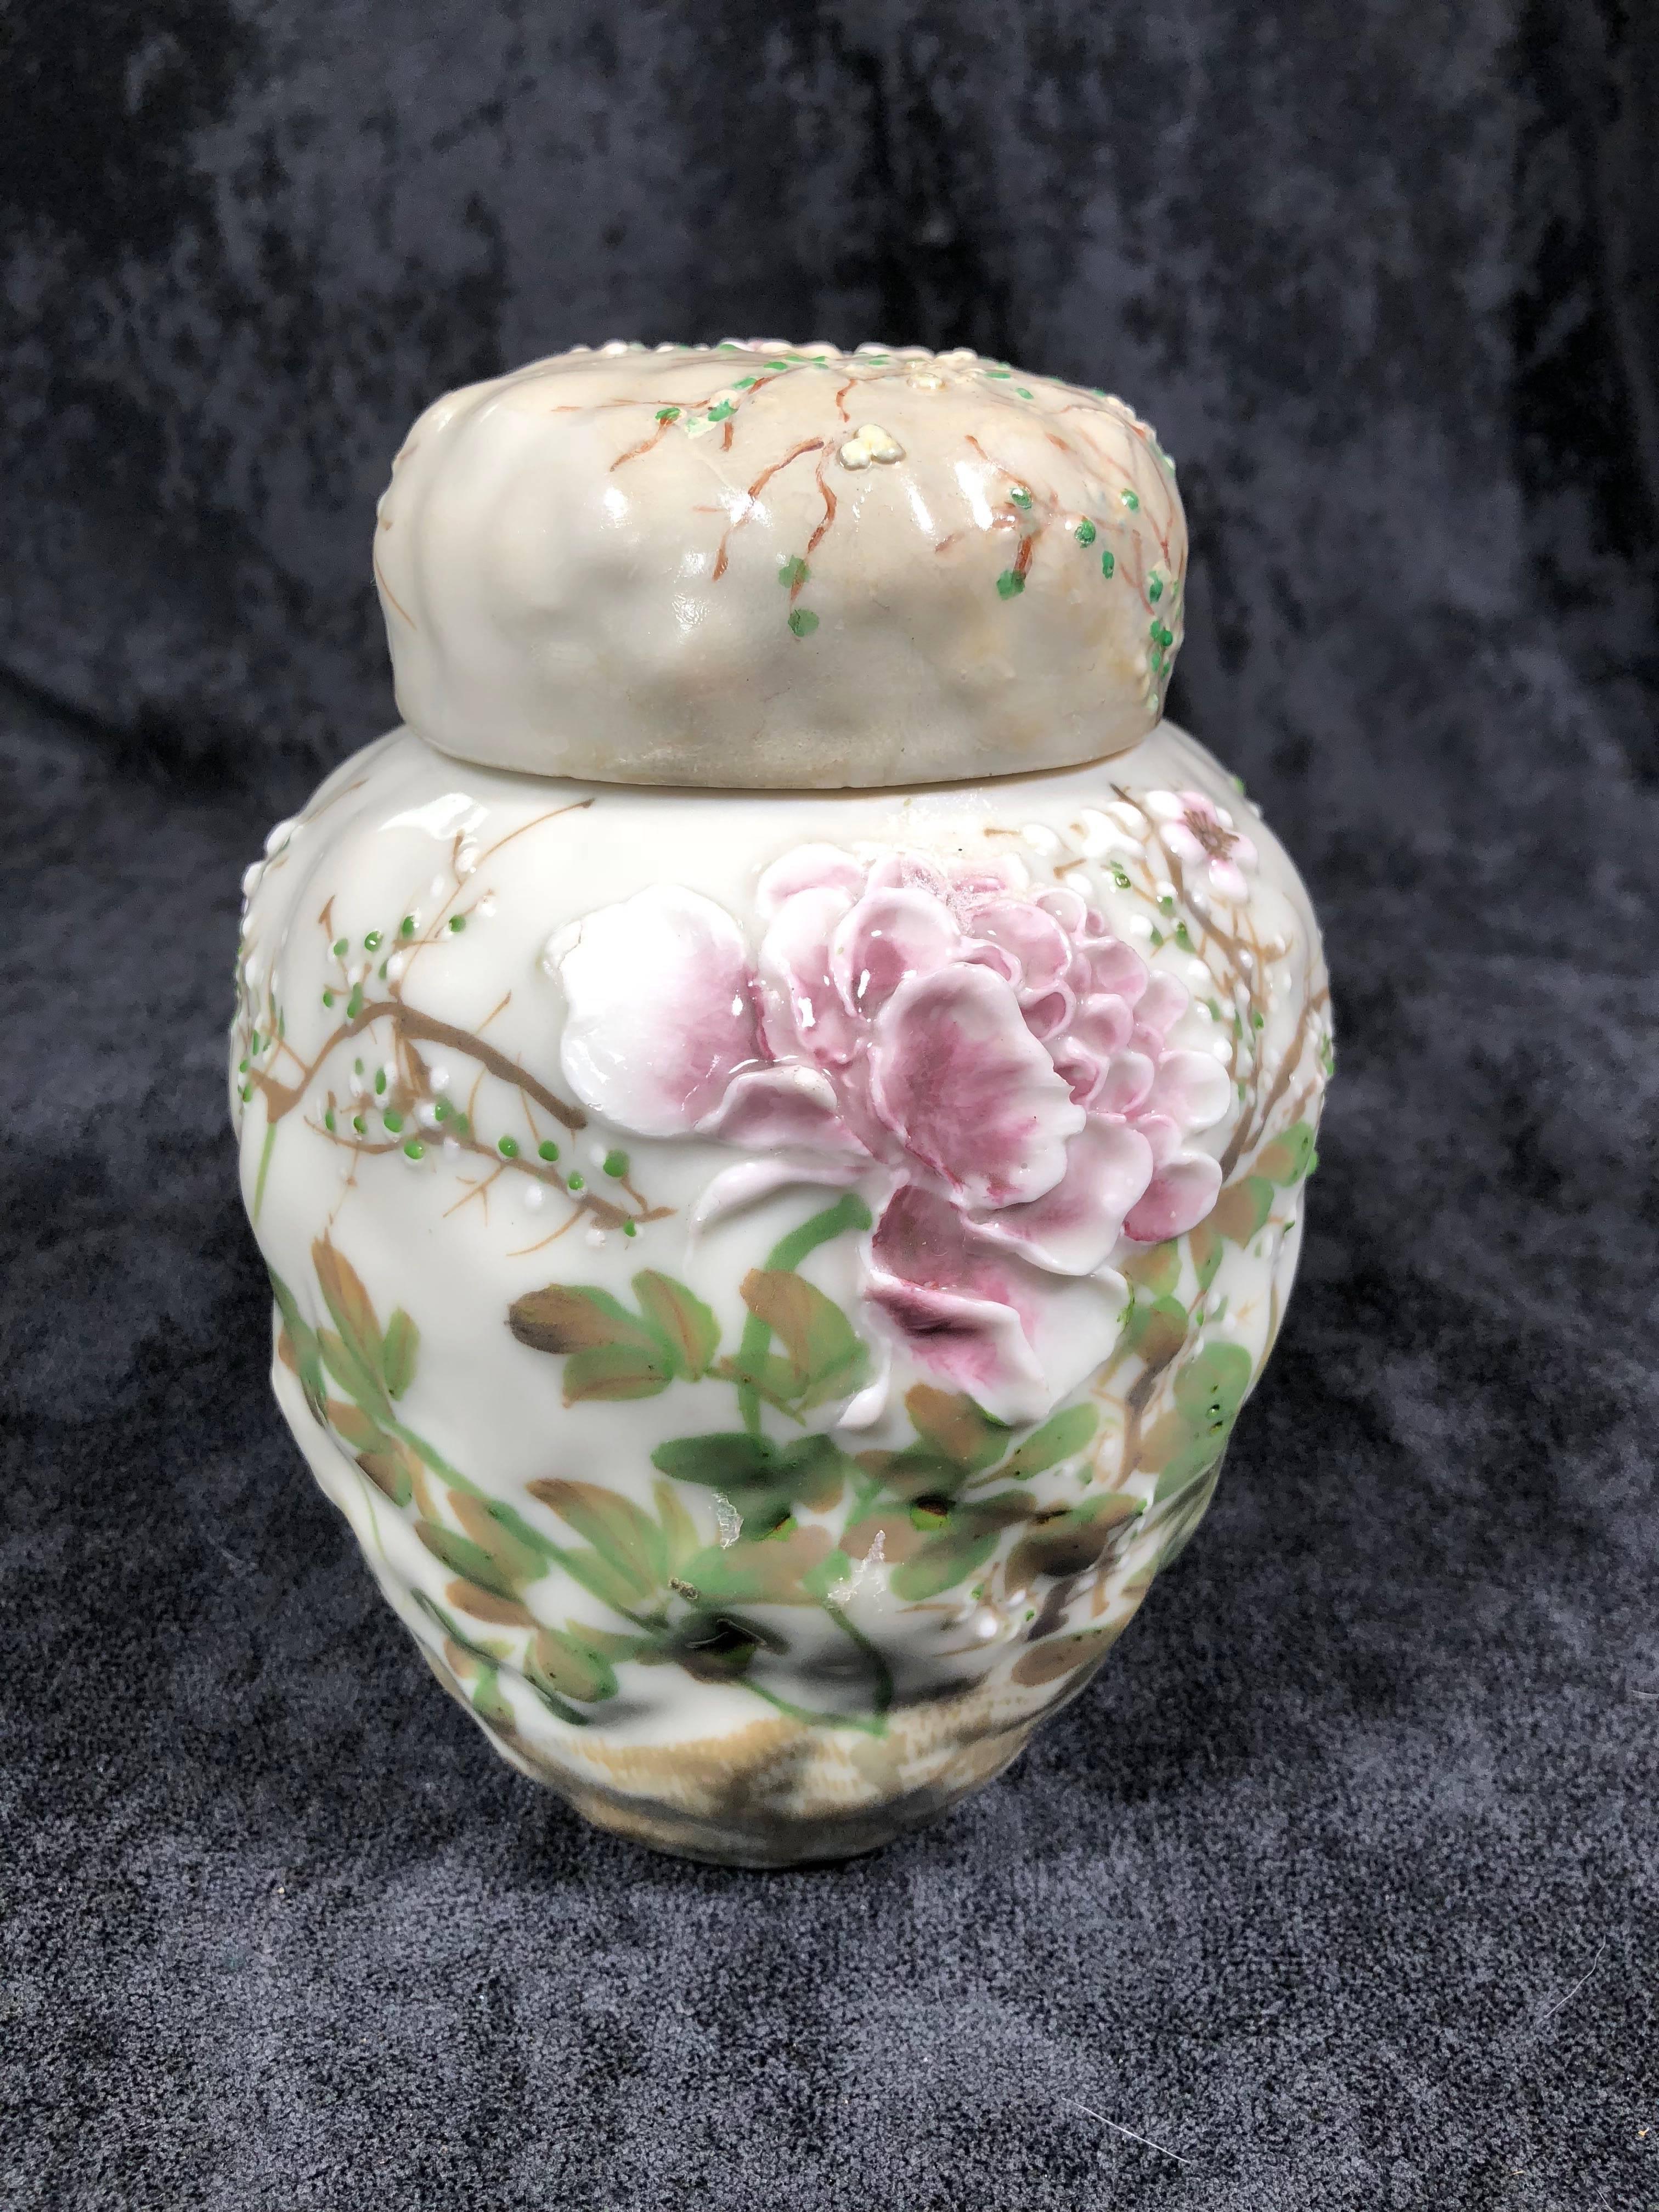 Very beautiful Japanese blossom pottery jar with lid. late Meiji period, Japan.  Measures 7 inches tall by 4 inches wide